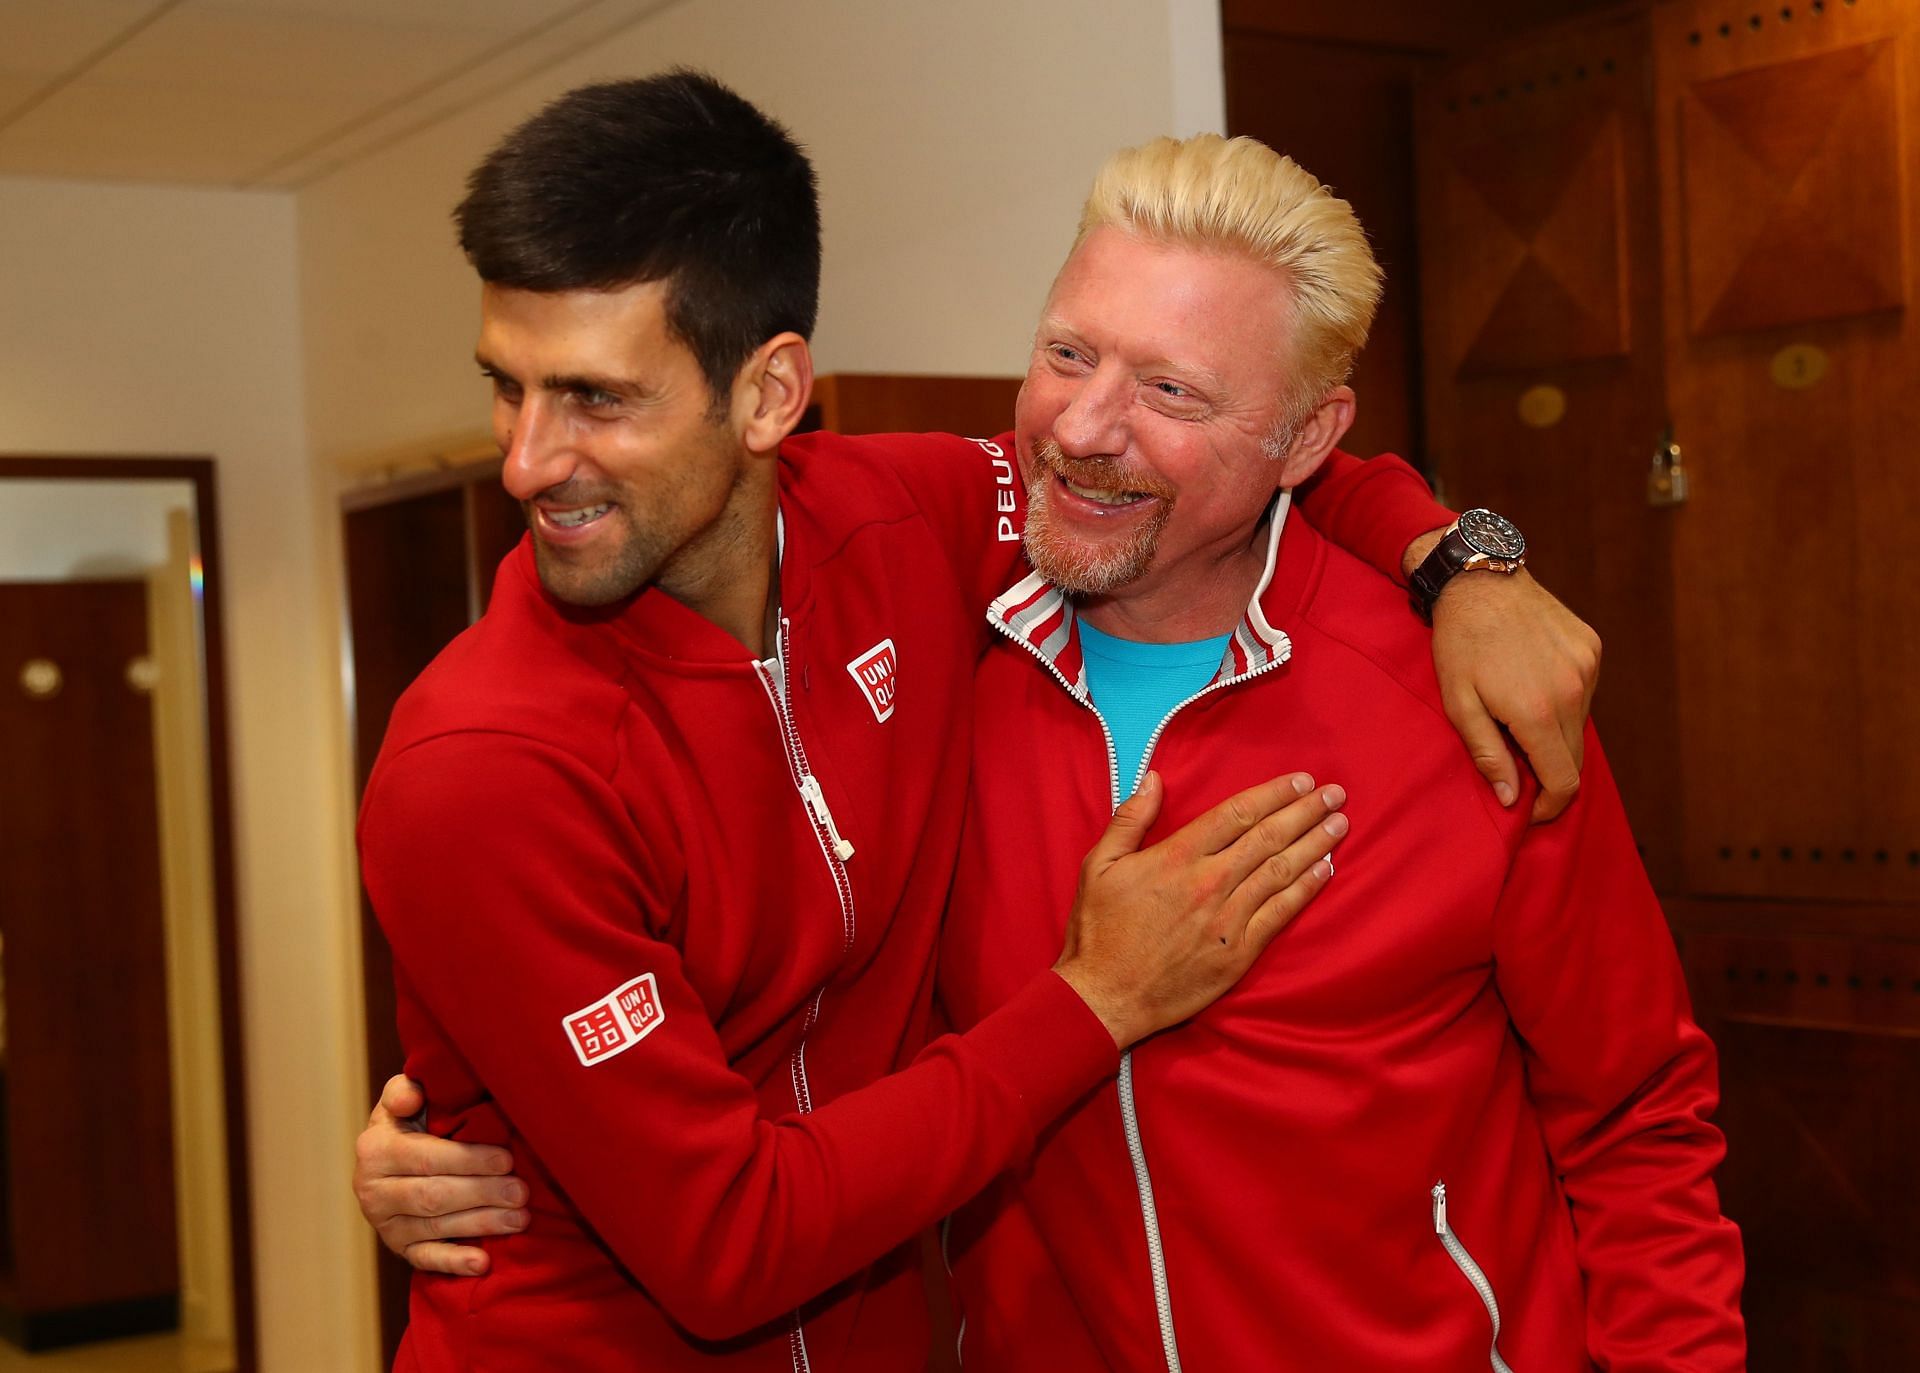 Boris Becker can resume working at the German Tennis Federation on his release from prison